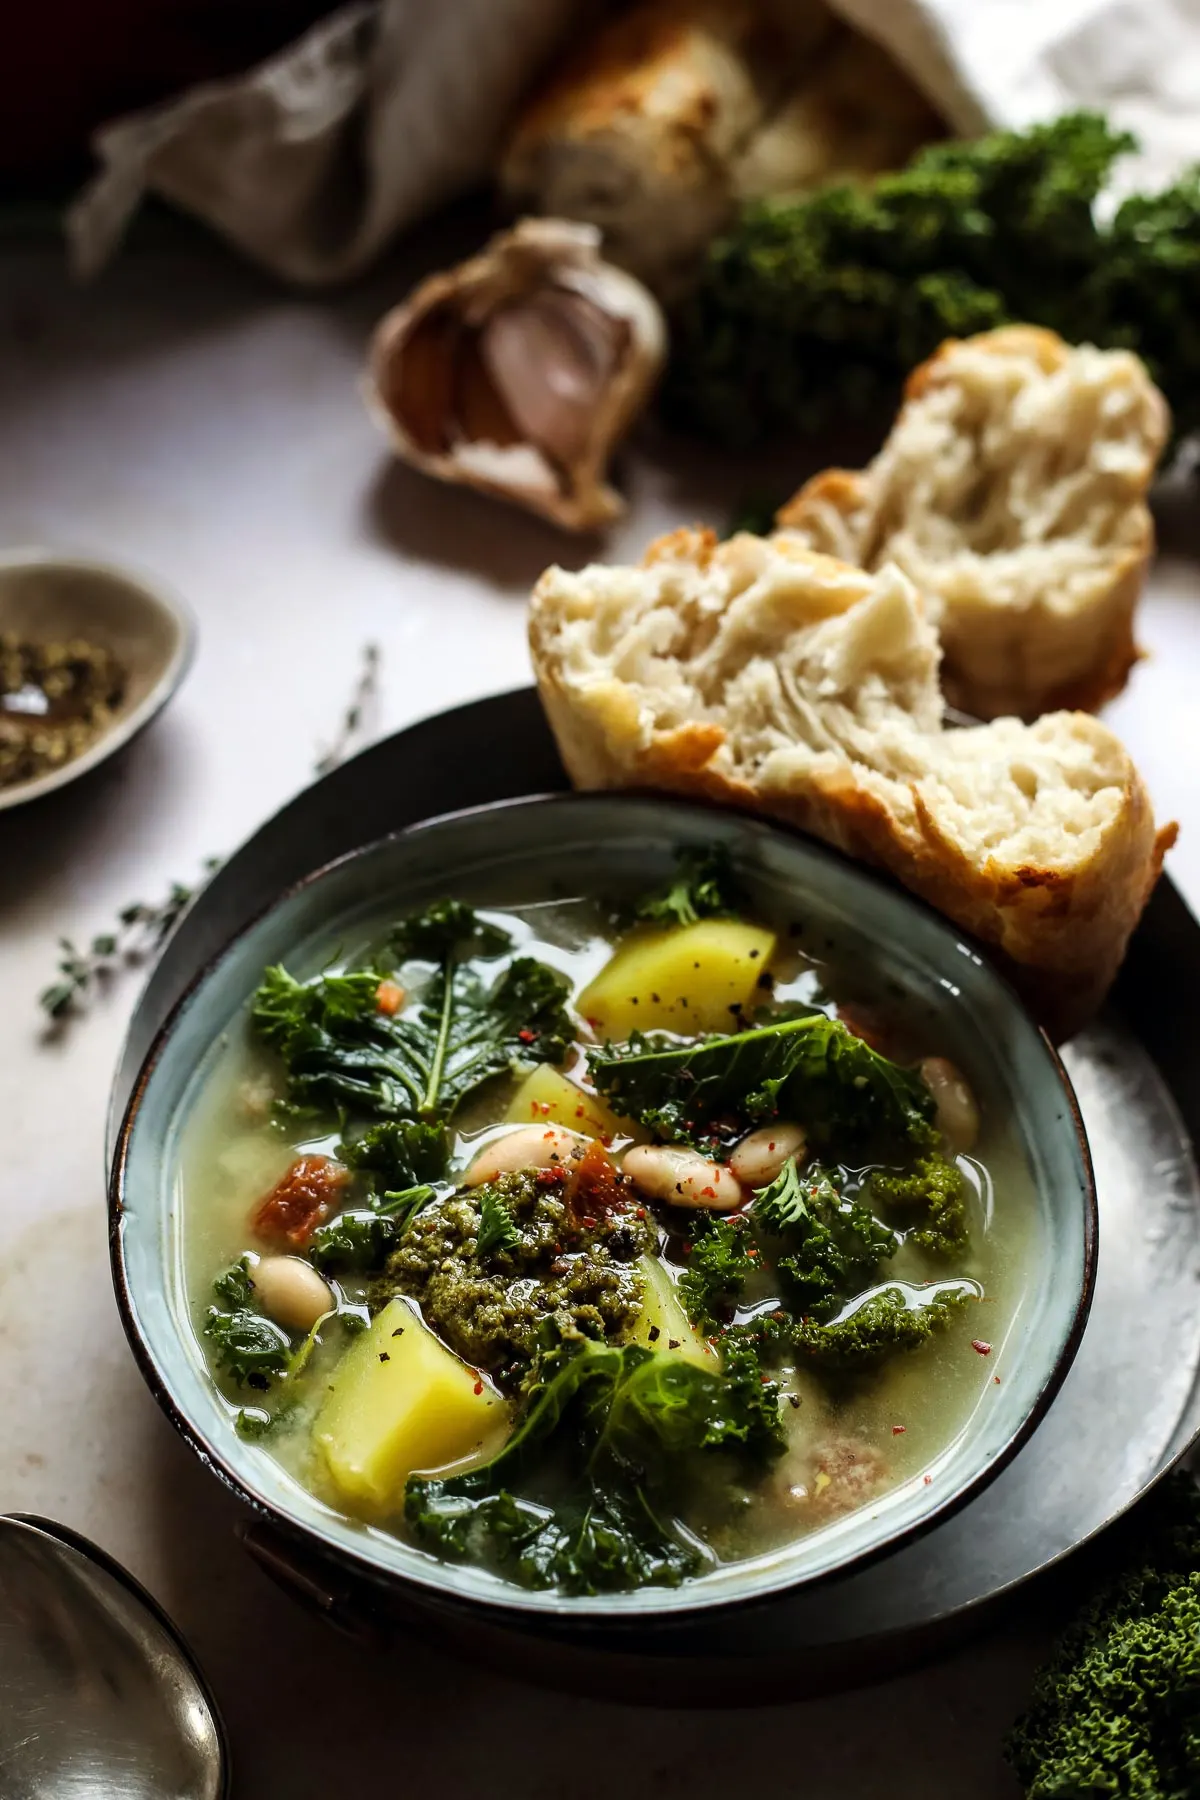 Potato and kale soup in a bowl served with crusty bread.